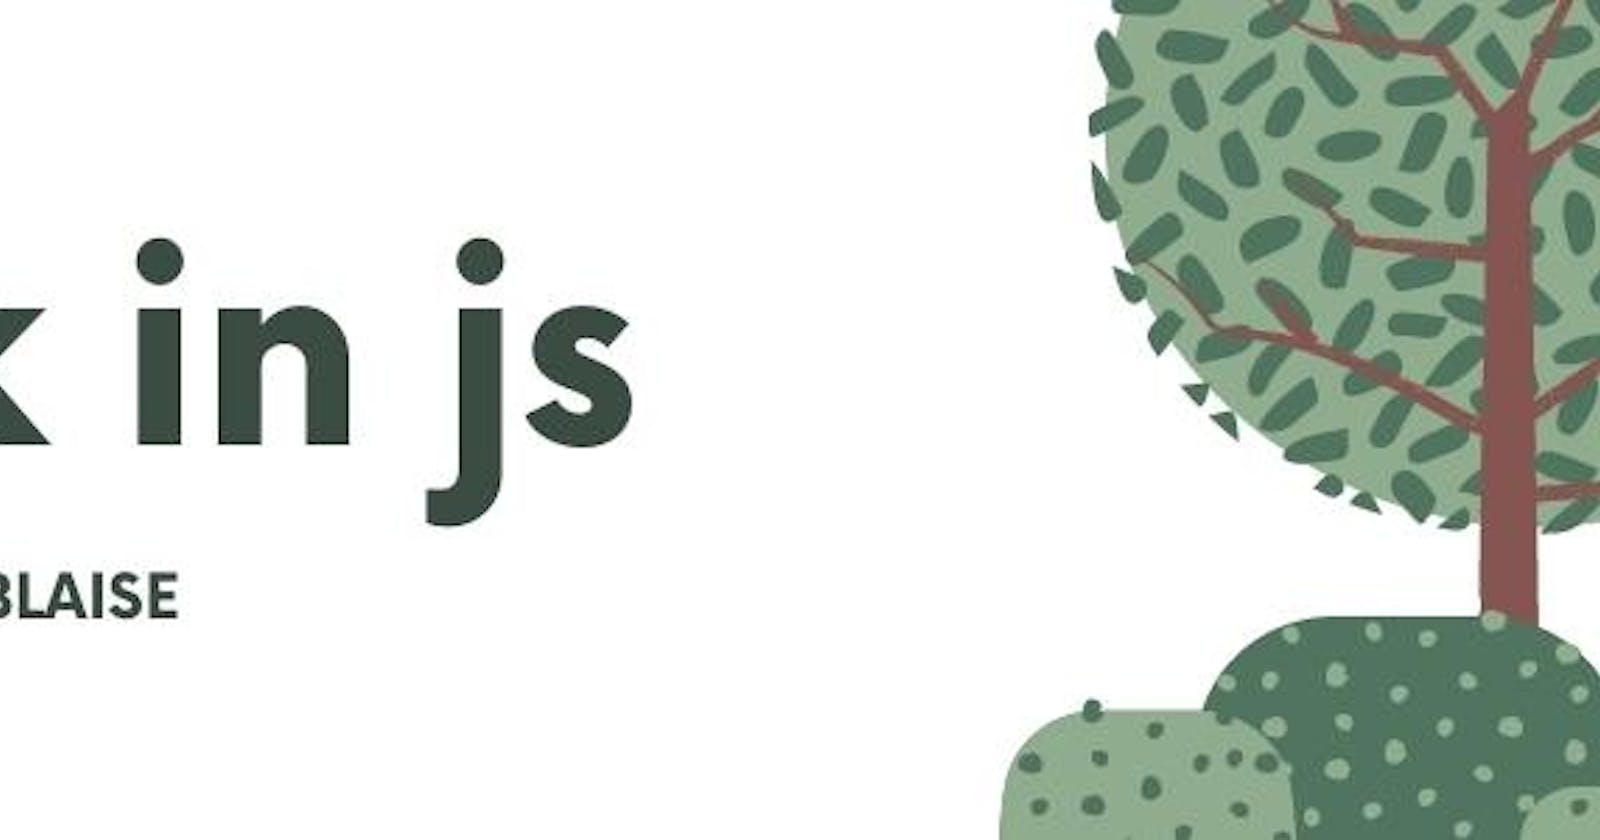 How to use the stack in Javascript